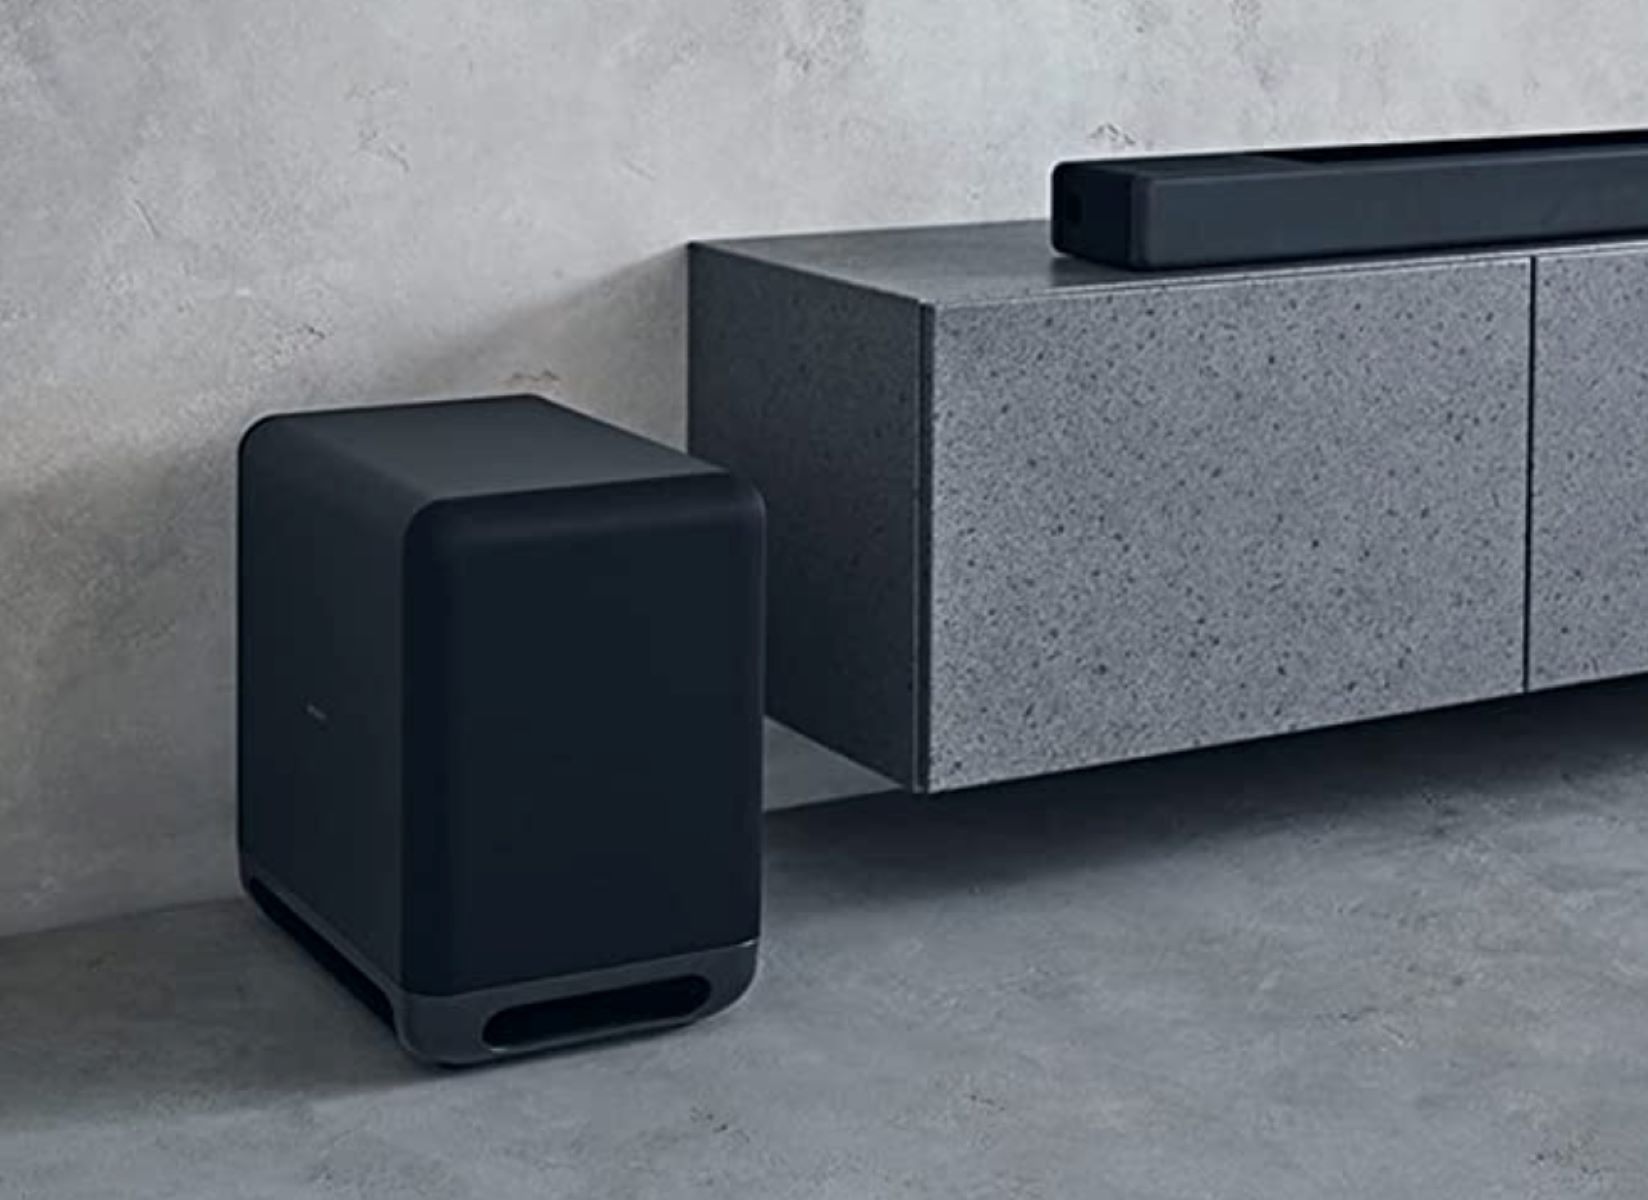 How To Connect Wireless Subwoofer To Soundbar